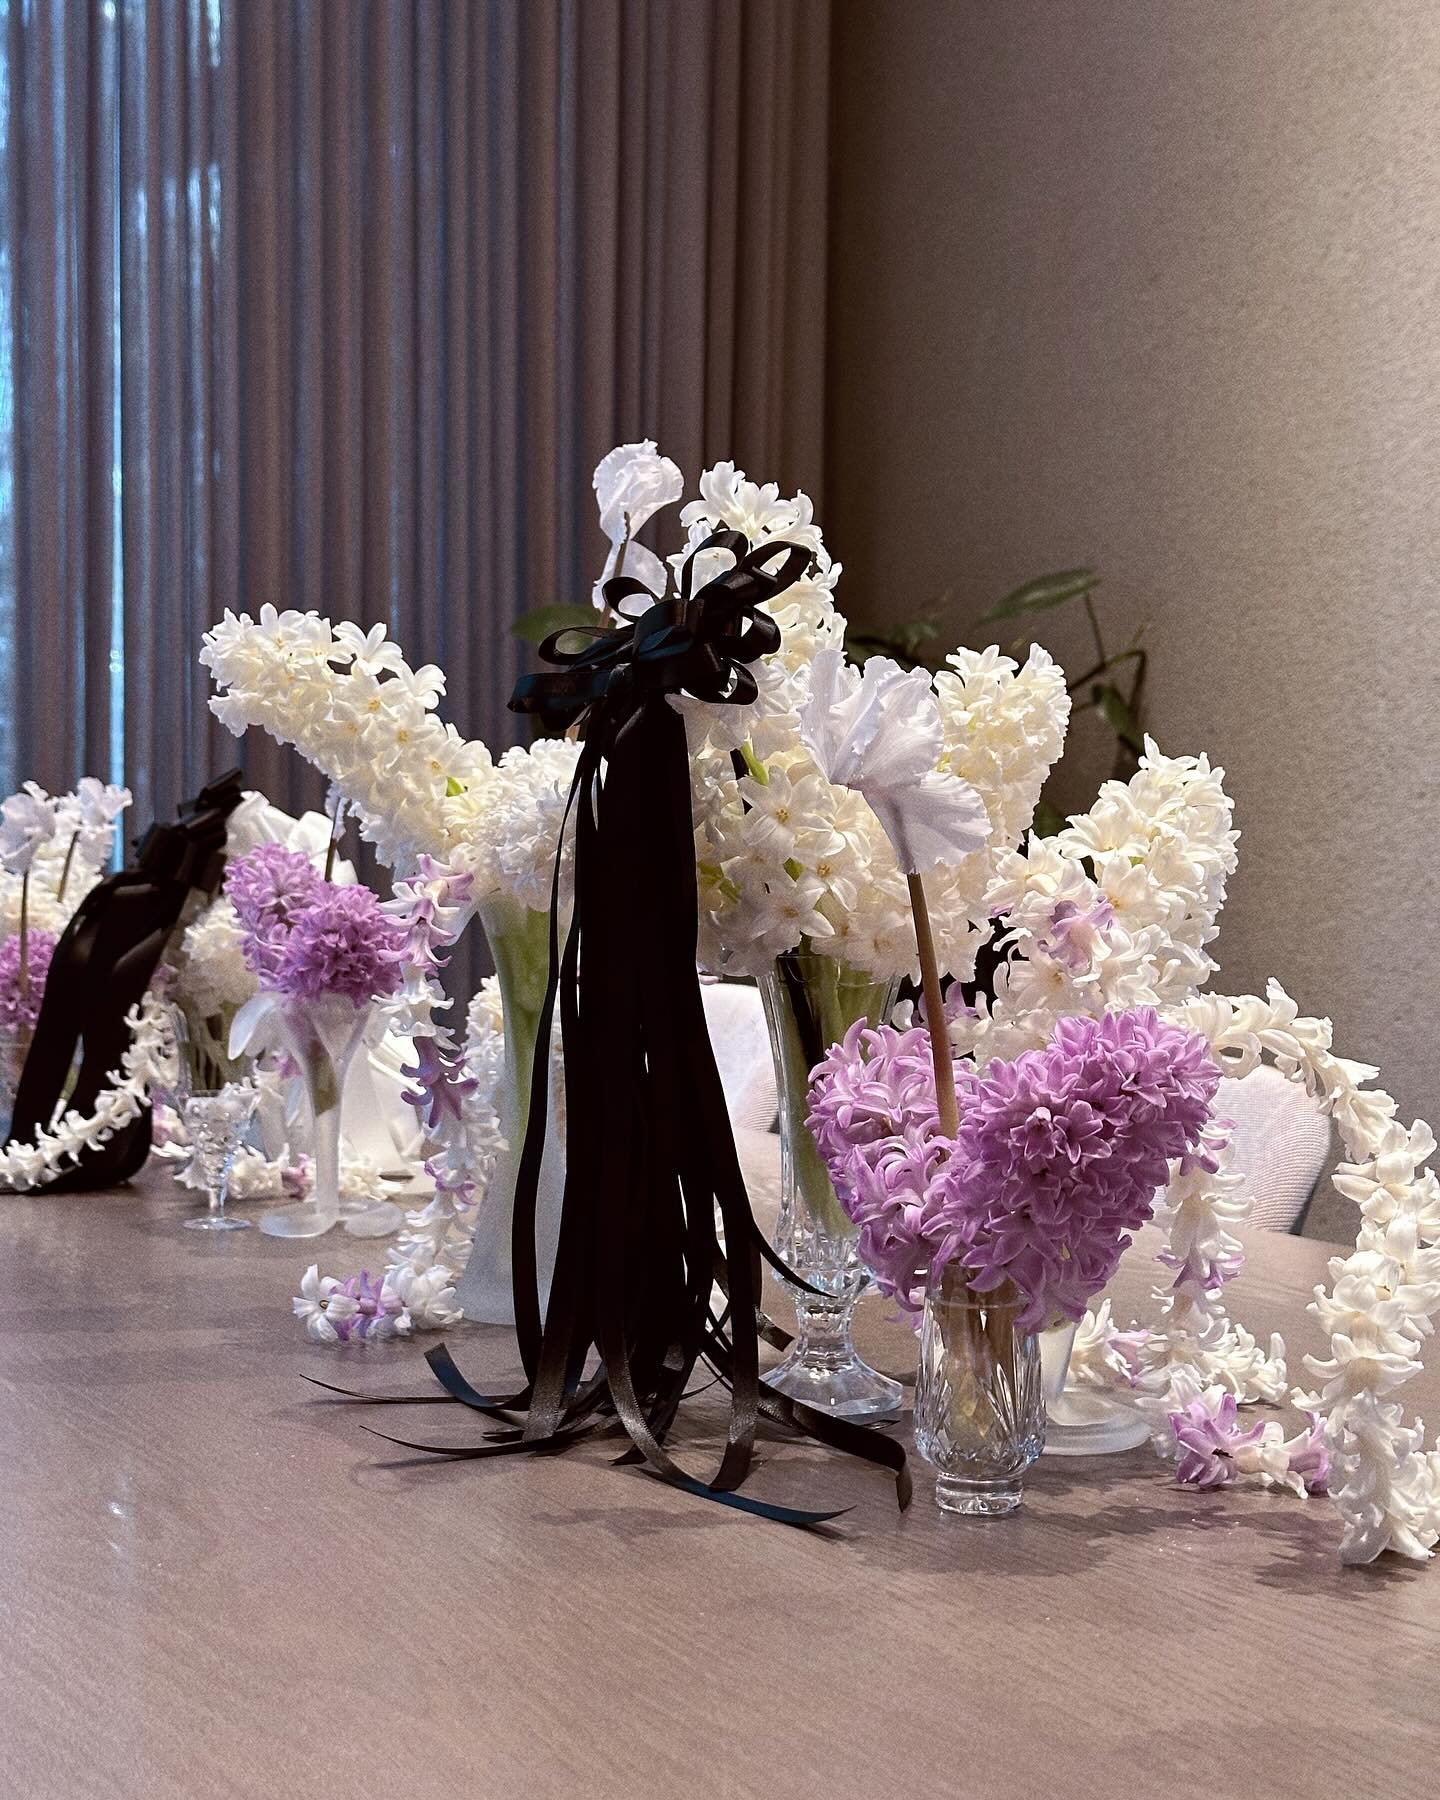 The Brief: Elegance &amp; Simplicity 🪻

A beautiful start to the week styling this tablescape at @lollo_melbourne for the wonderful team at @teamjaggad 

White &amp; ivory with pops of lilac and black. 

This installation was crafted from a seasonal